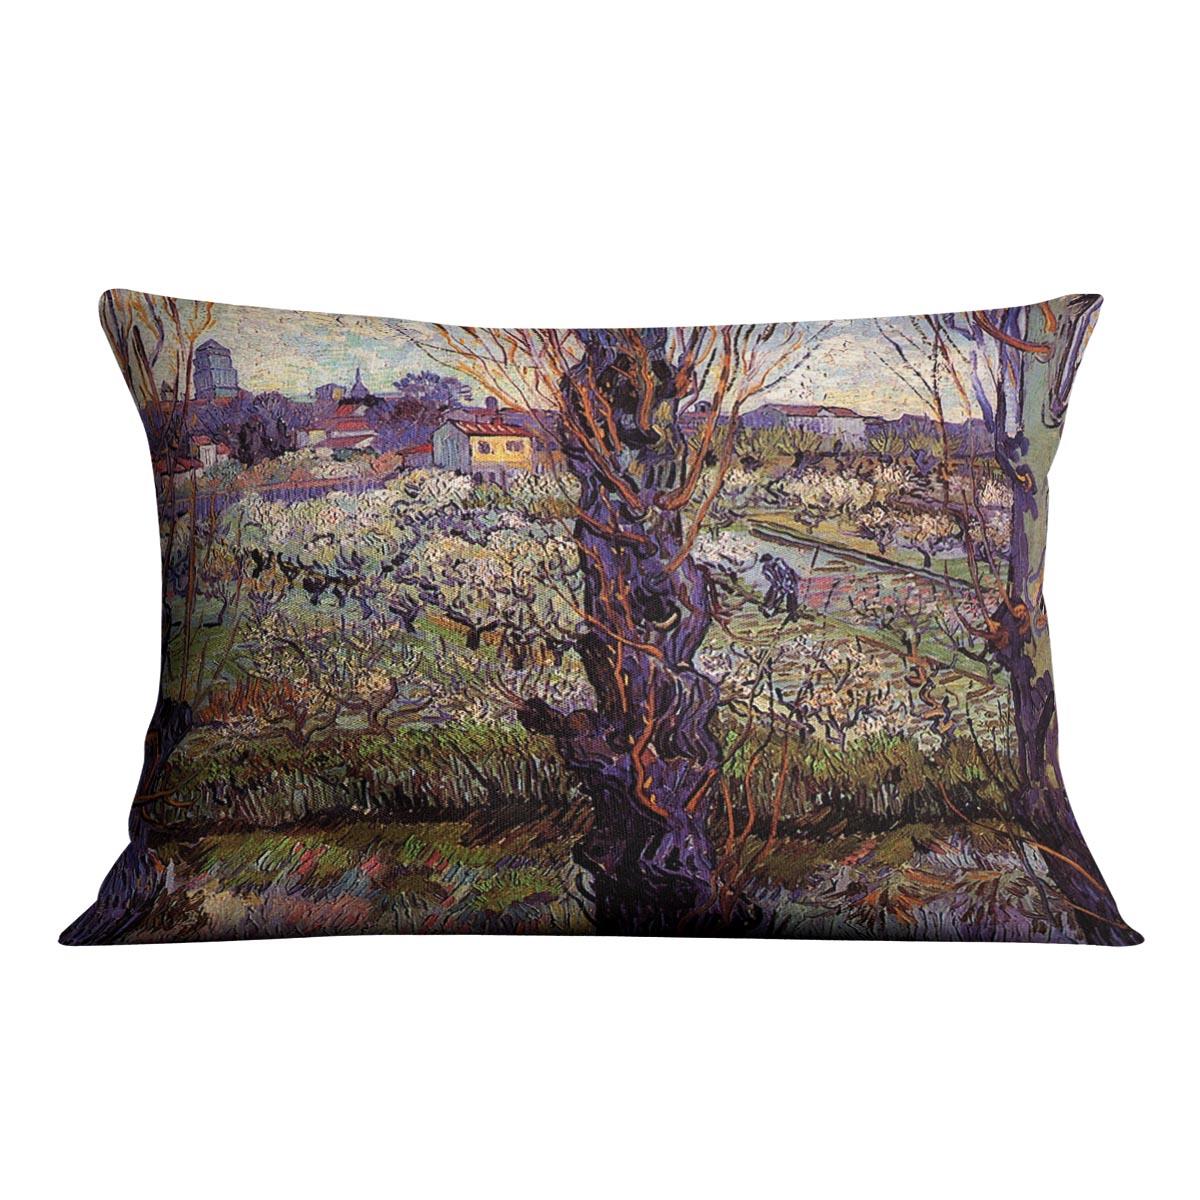 Orchard in Blossom with View of Arles by Van Gogh Cushion